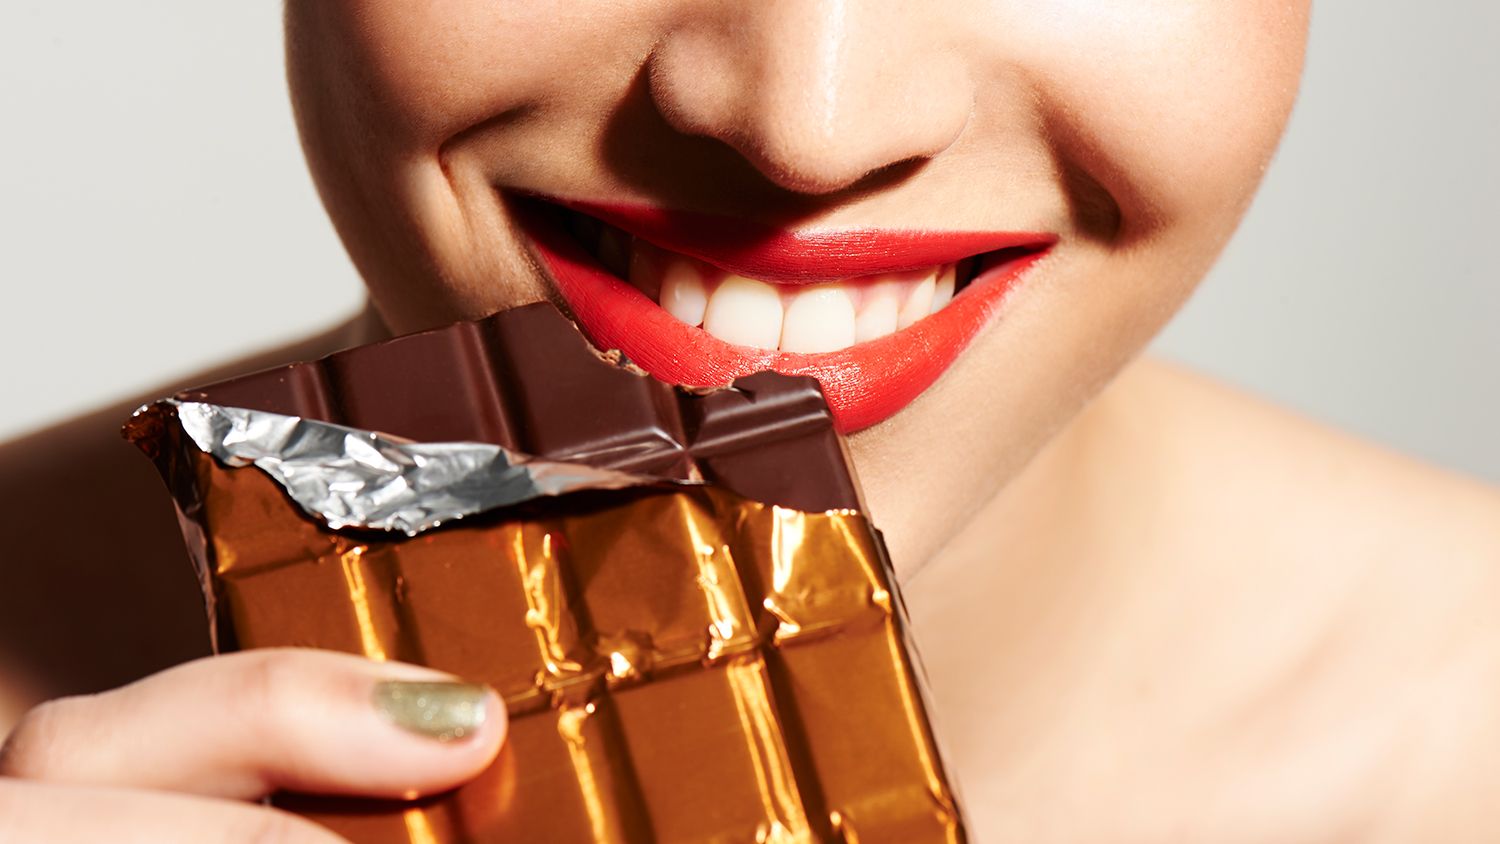 Photo showing a close-up of a person wearing red lipstick and holding a chocolate bar wrapped in gold foil